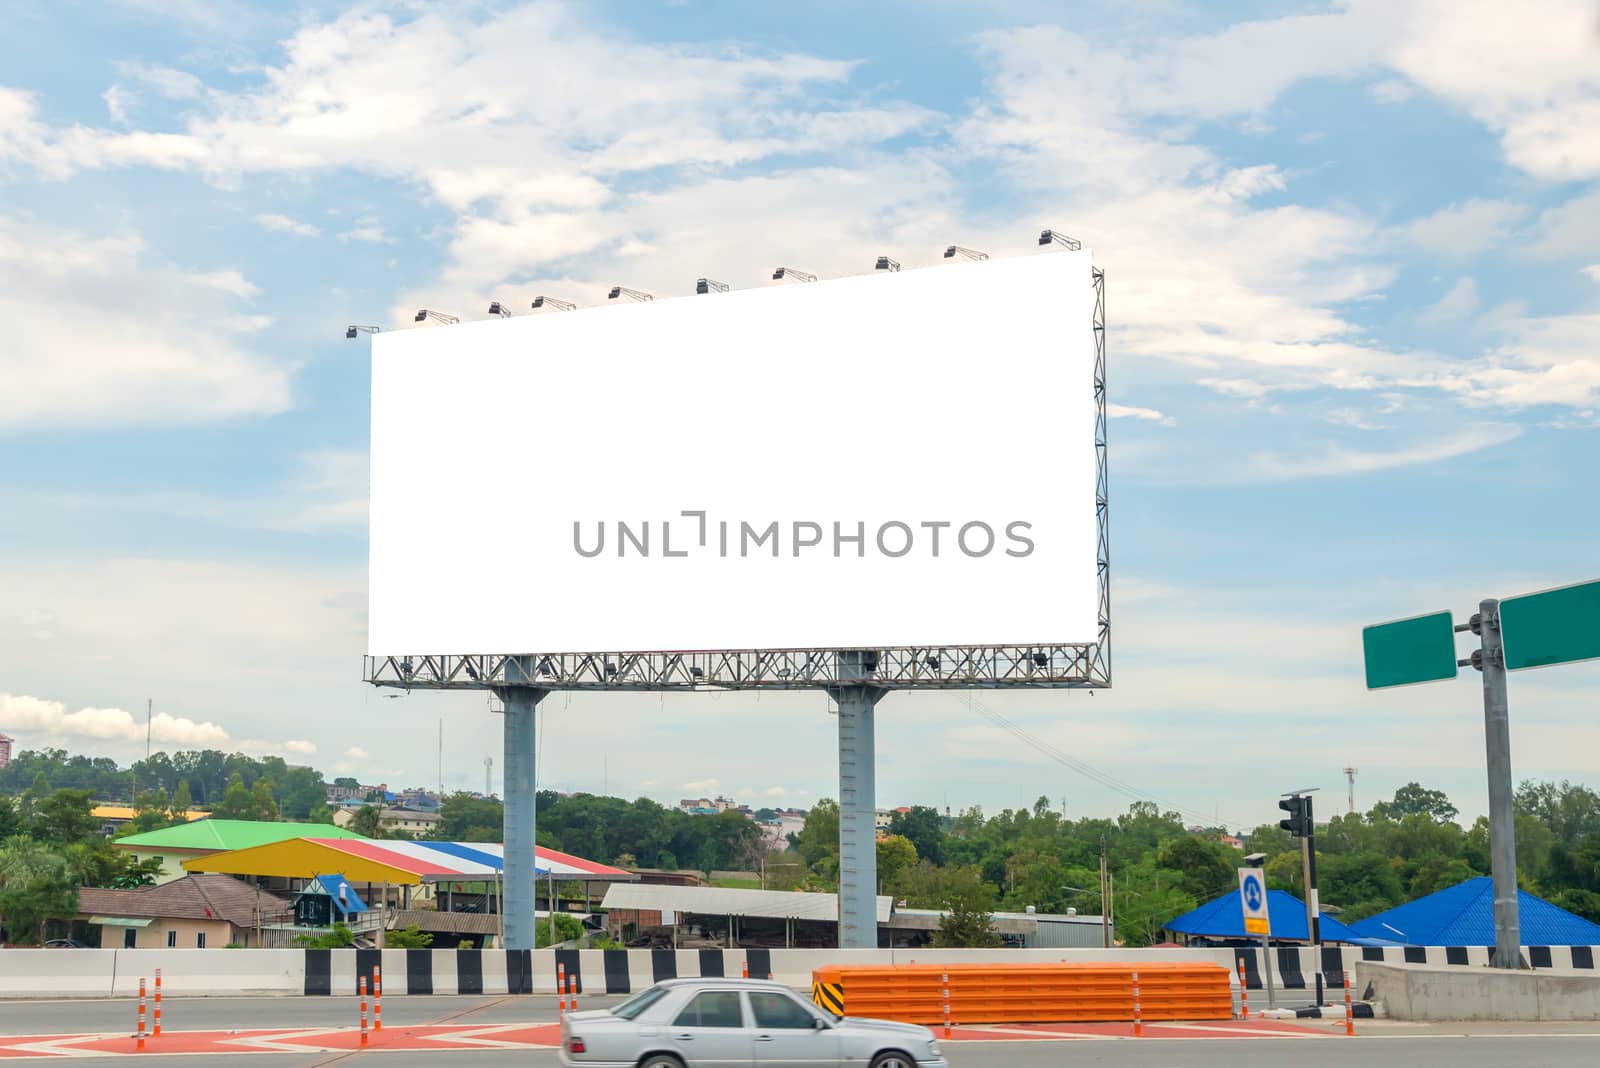 billboard blank on road with city view background for advertising.